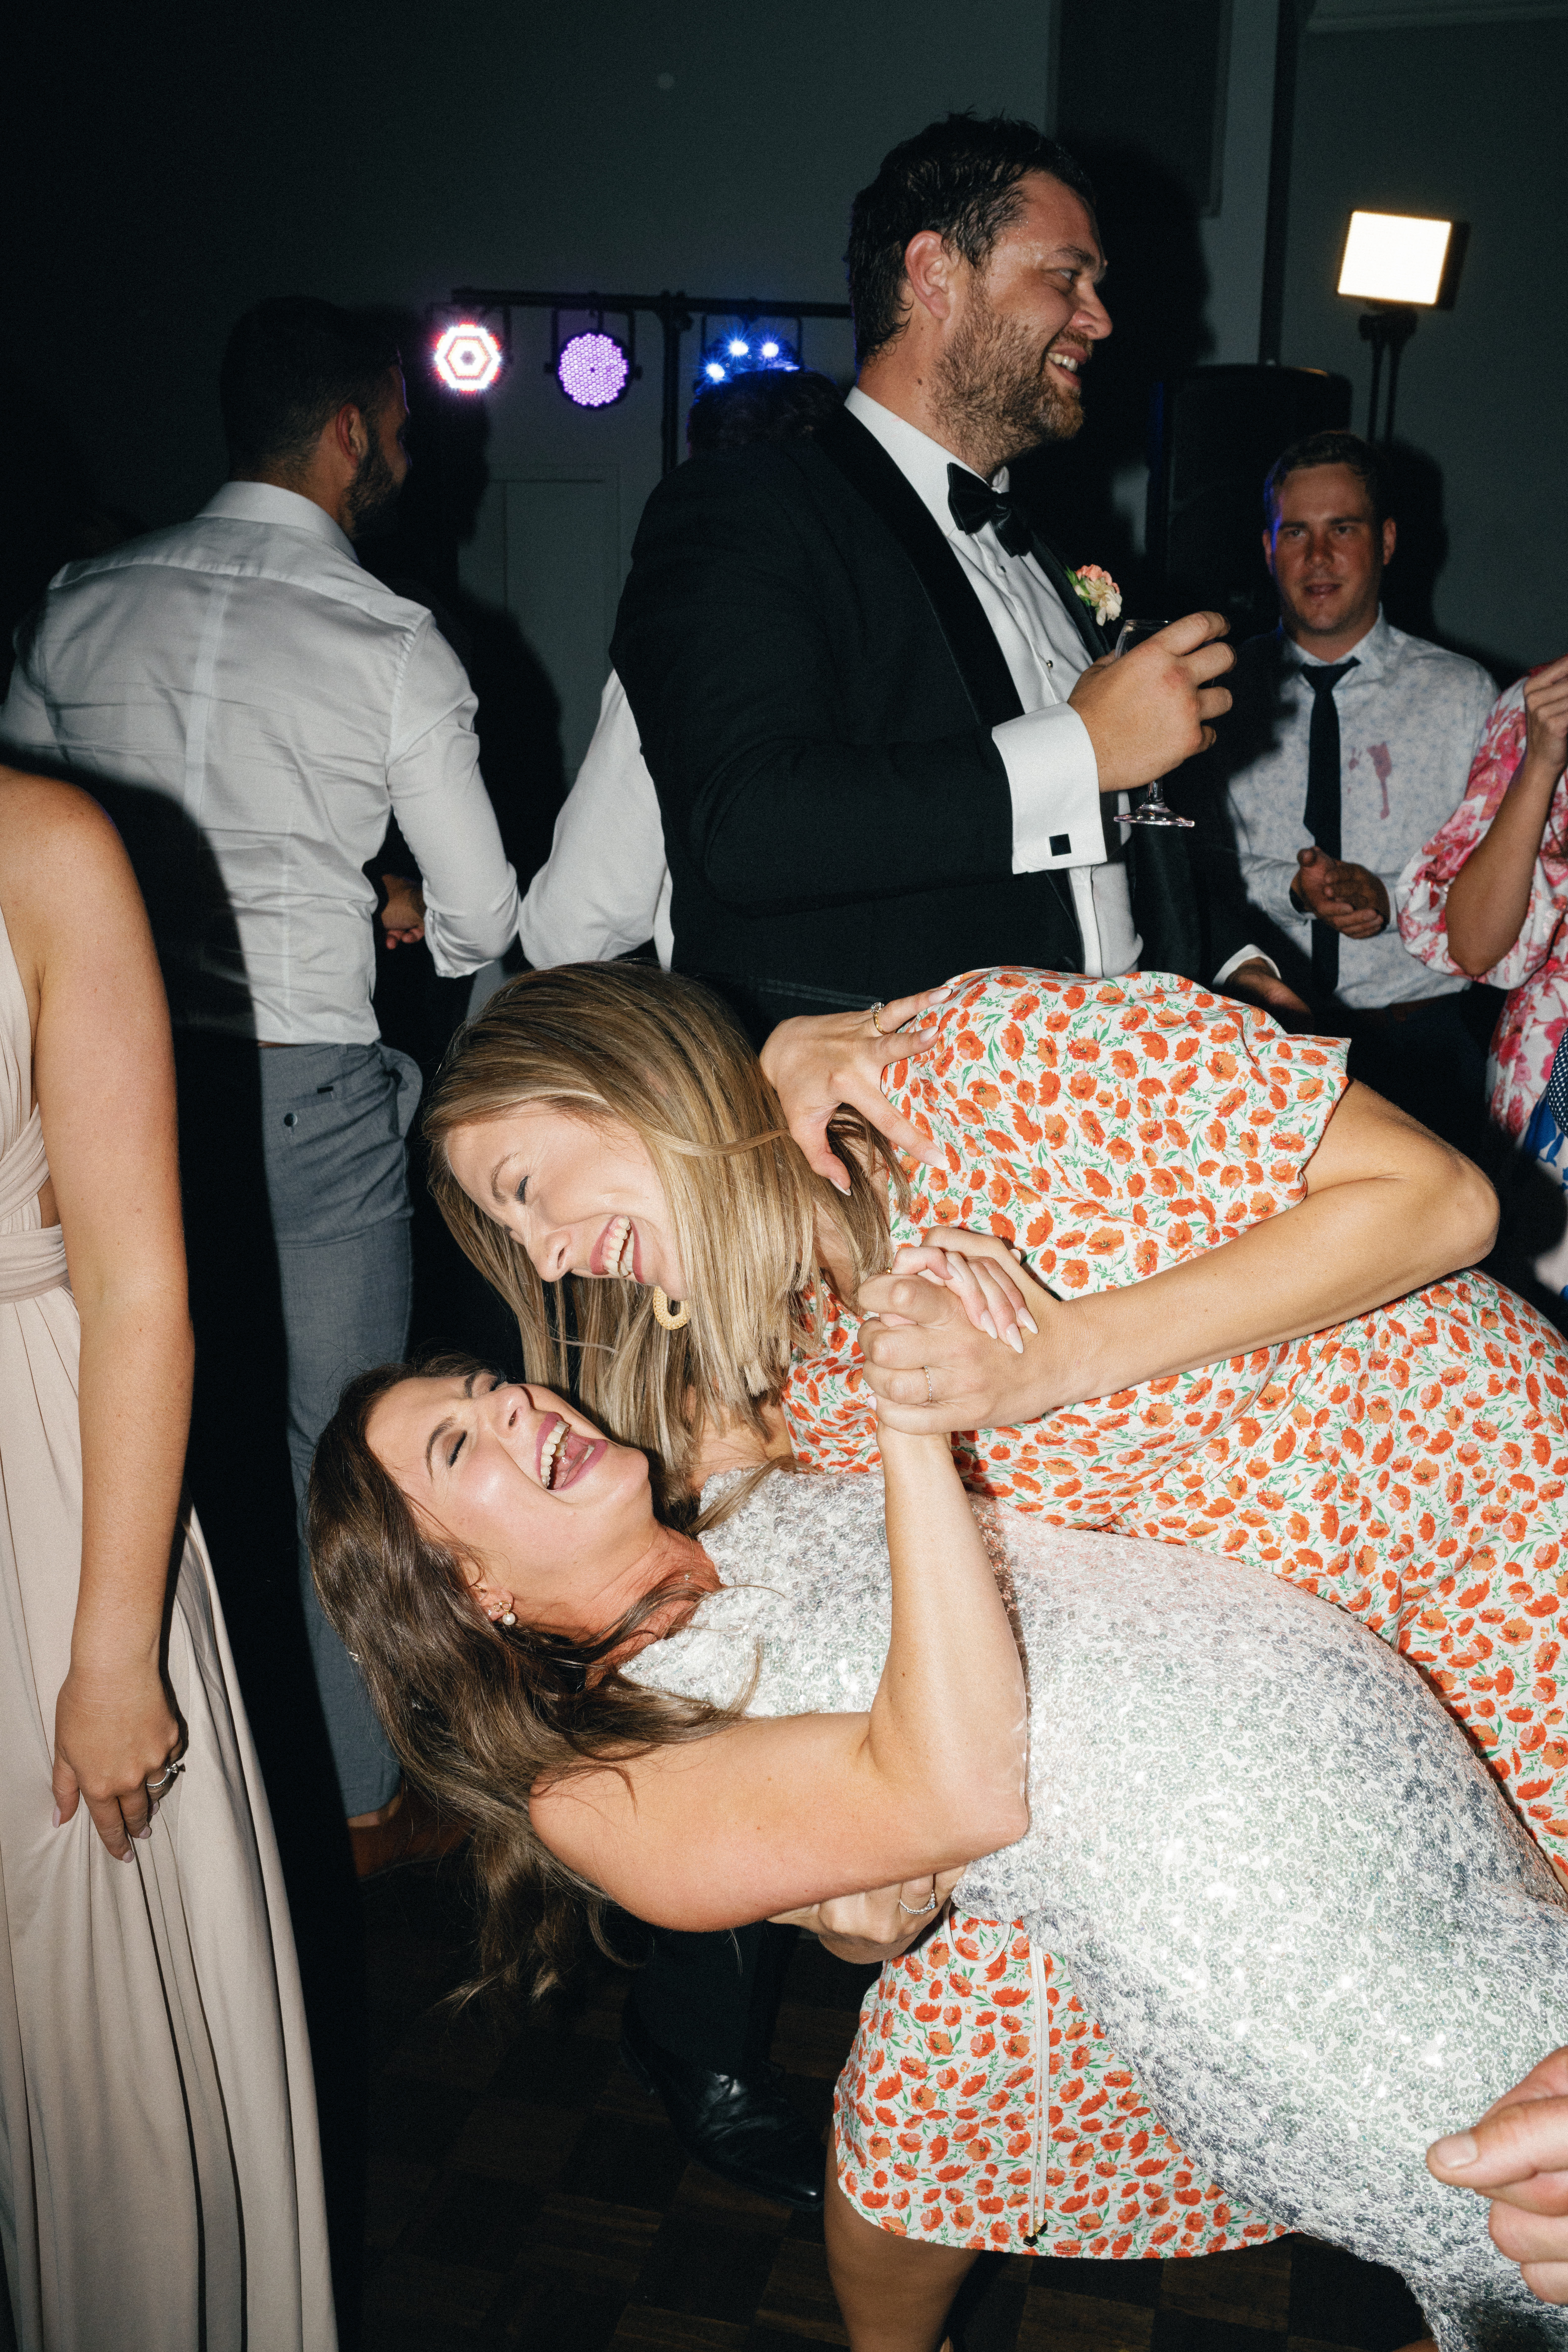 An image shot using flash photography of a bride partying on the dance floor with her friend.